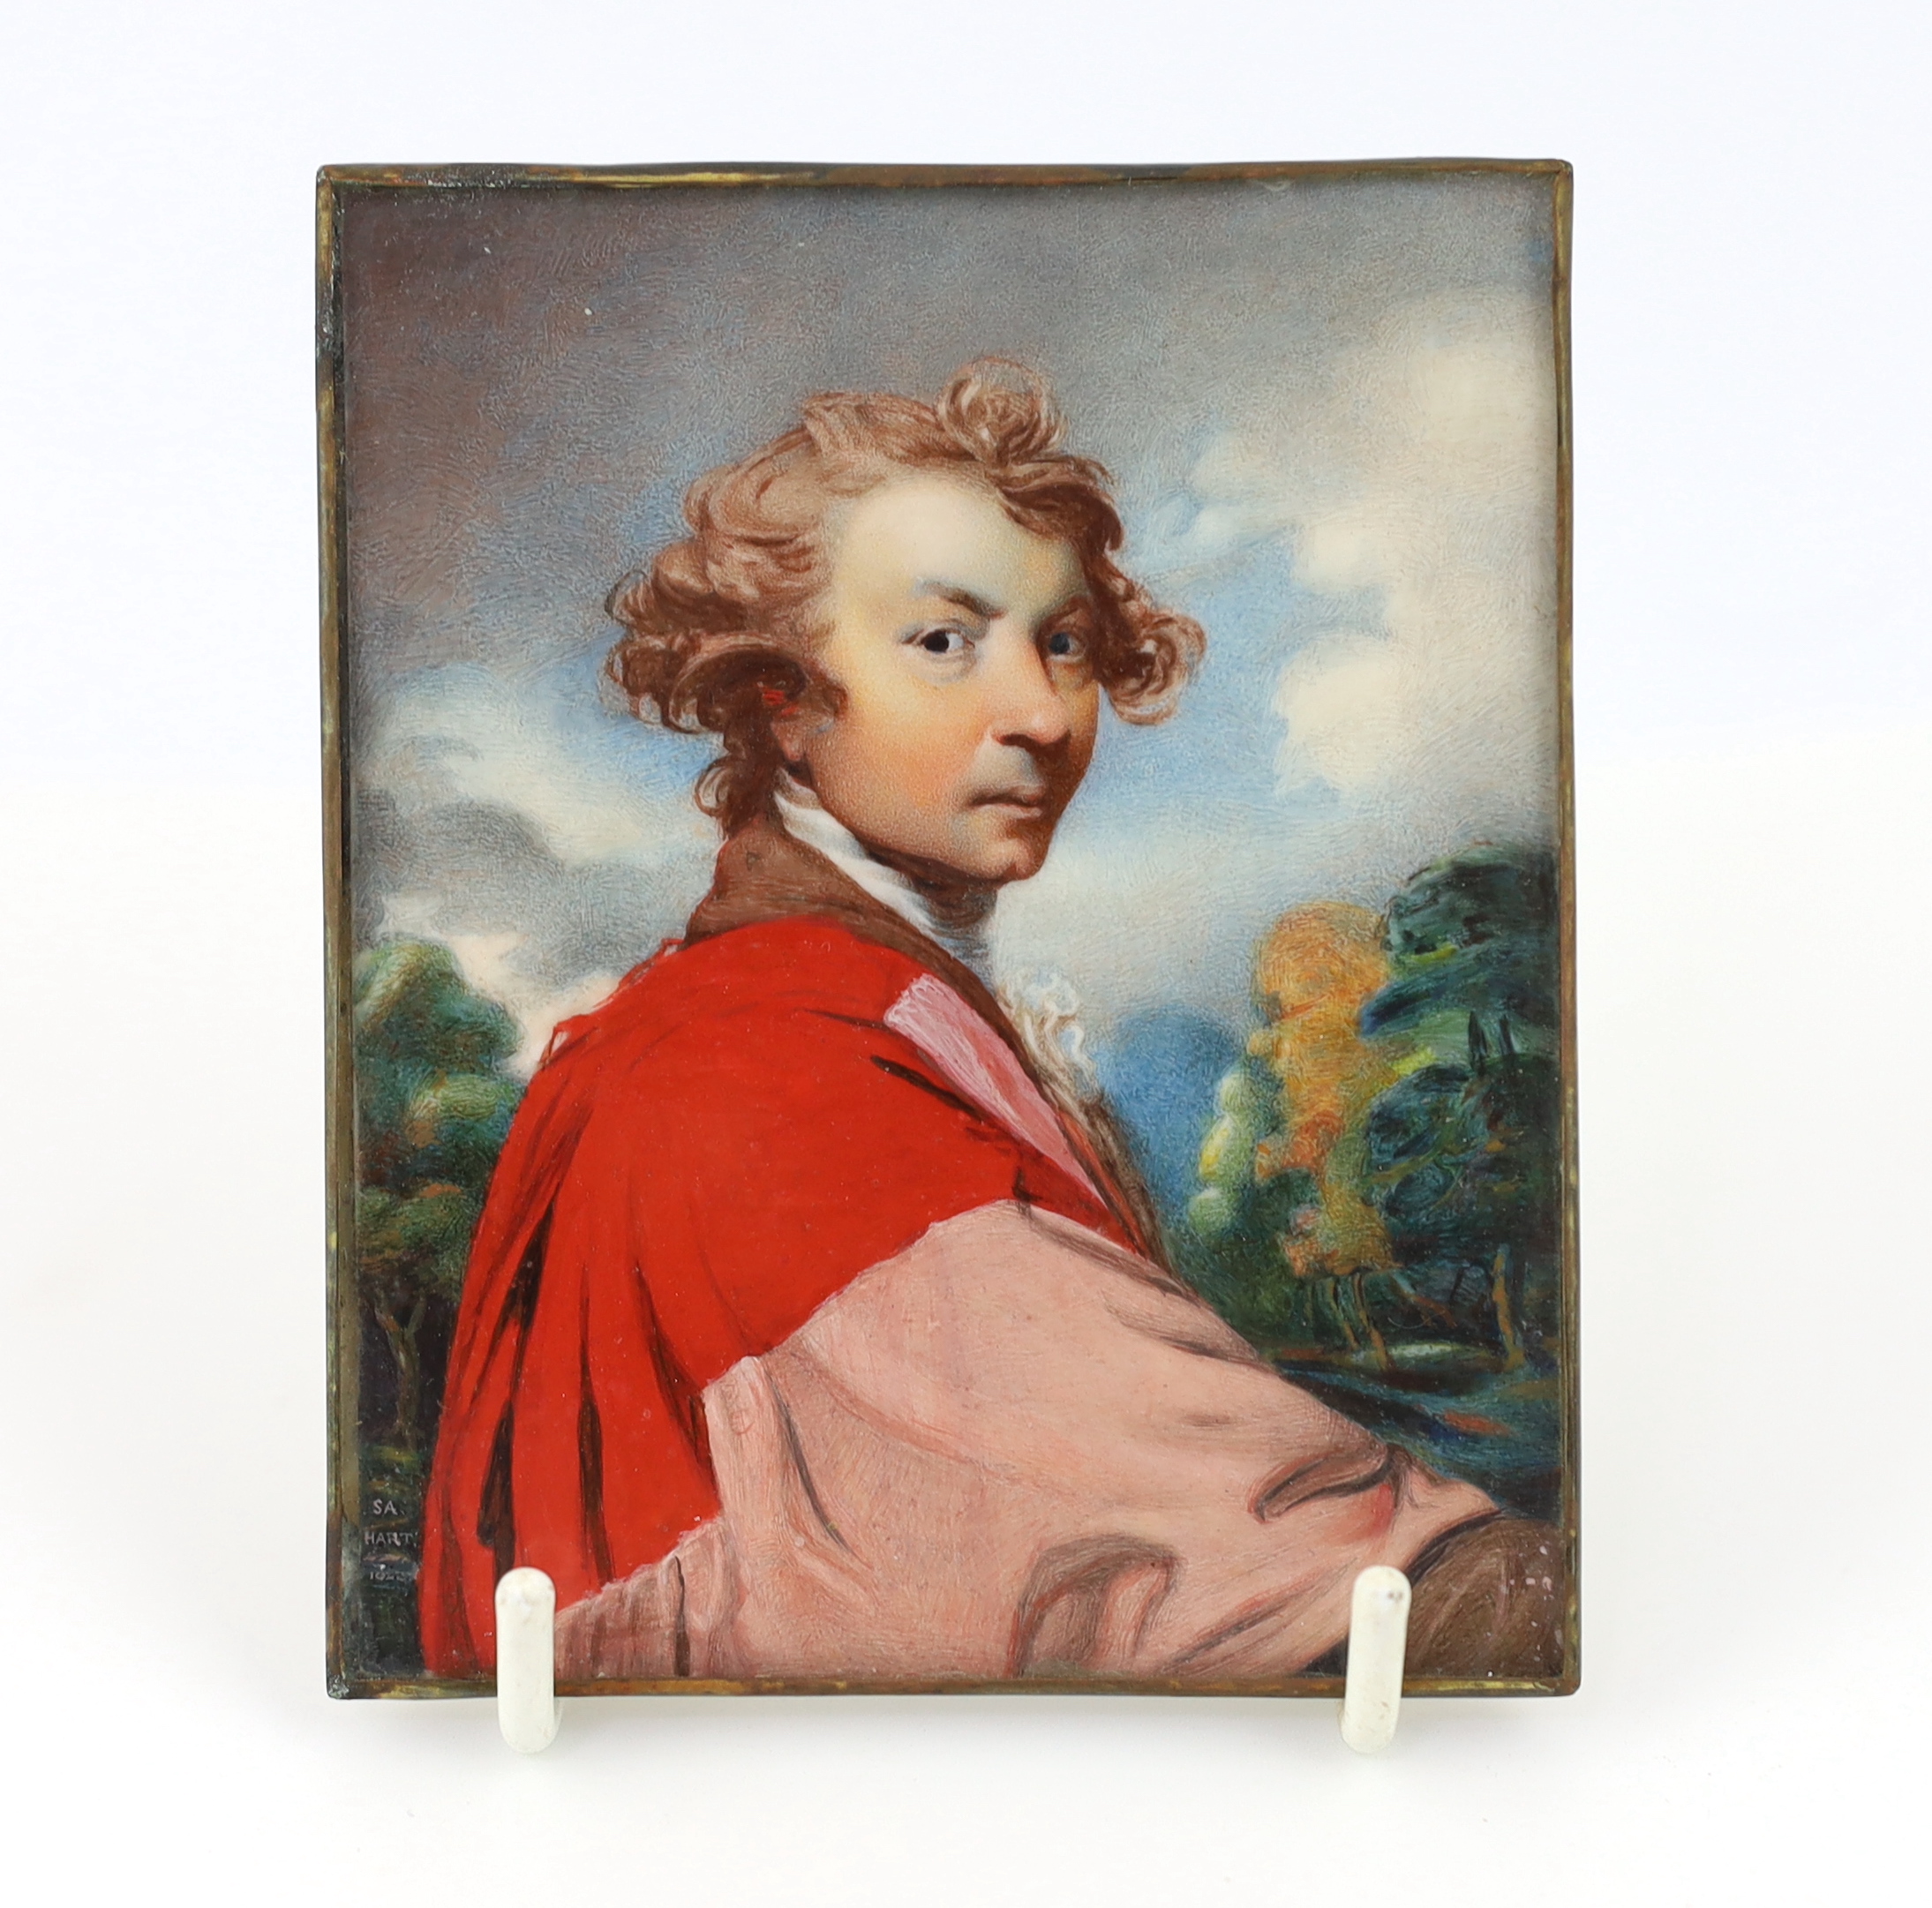 Solomon Alexander Hart R.A. (1806-1881) after Sir Joshua Reynolds PRA (1723-1792), Portrait miniature of Sir Joshua Reynolds, watercolour on ivory, 9.4 x 7.5cm. CITES Submission reference GELH3HJ9